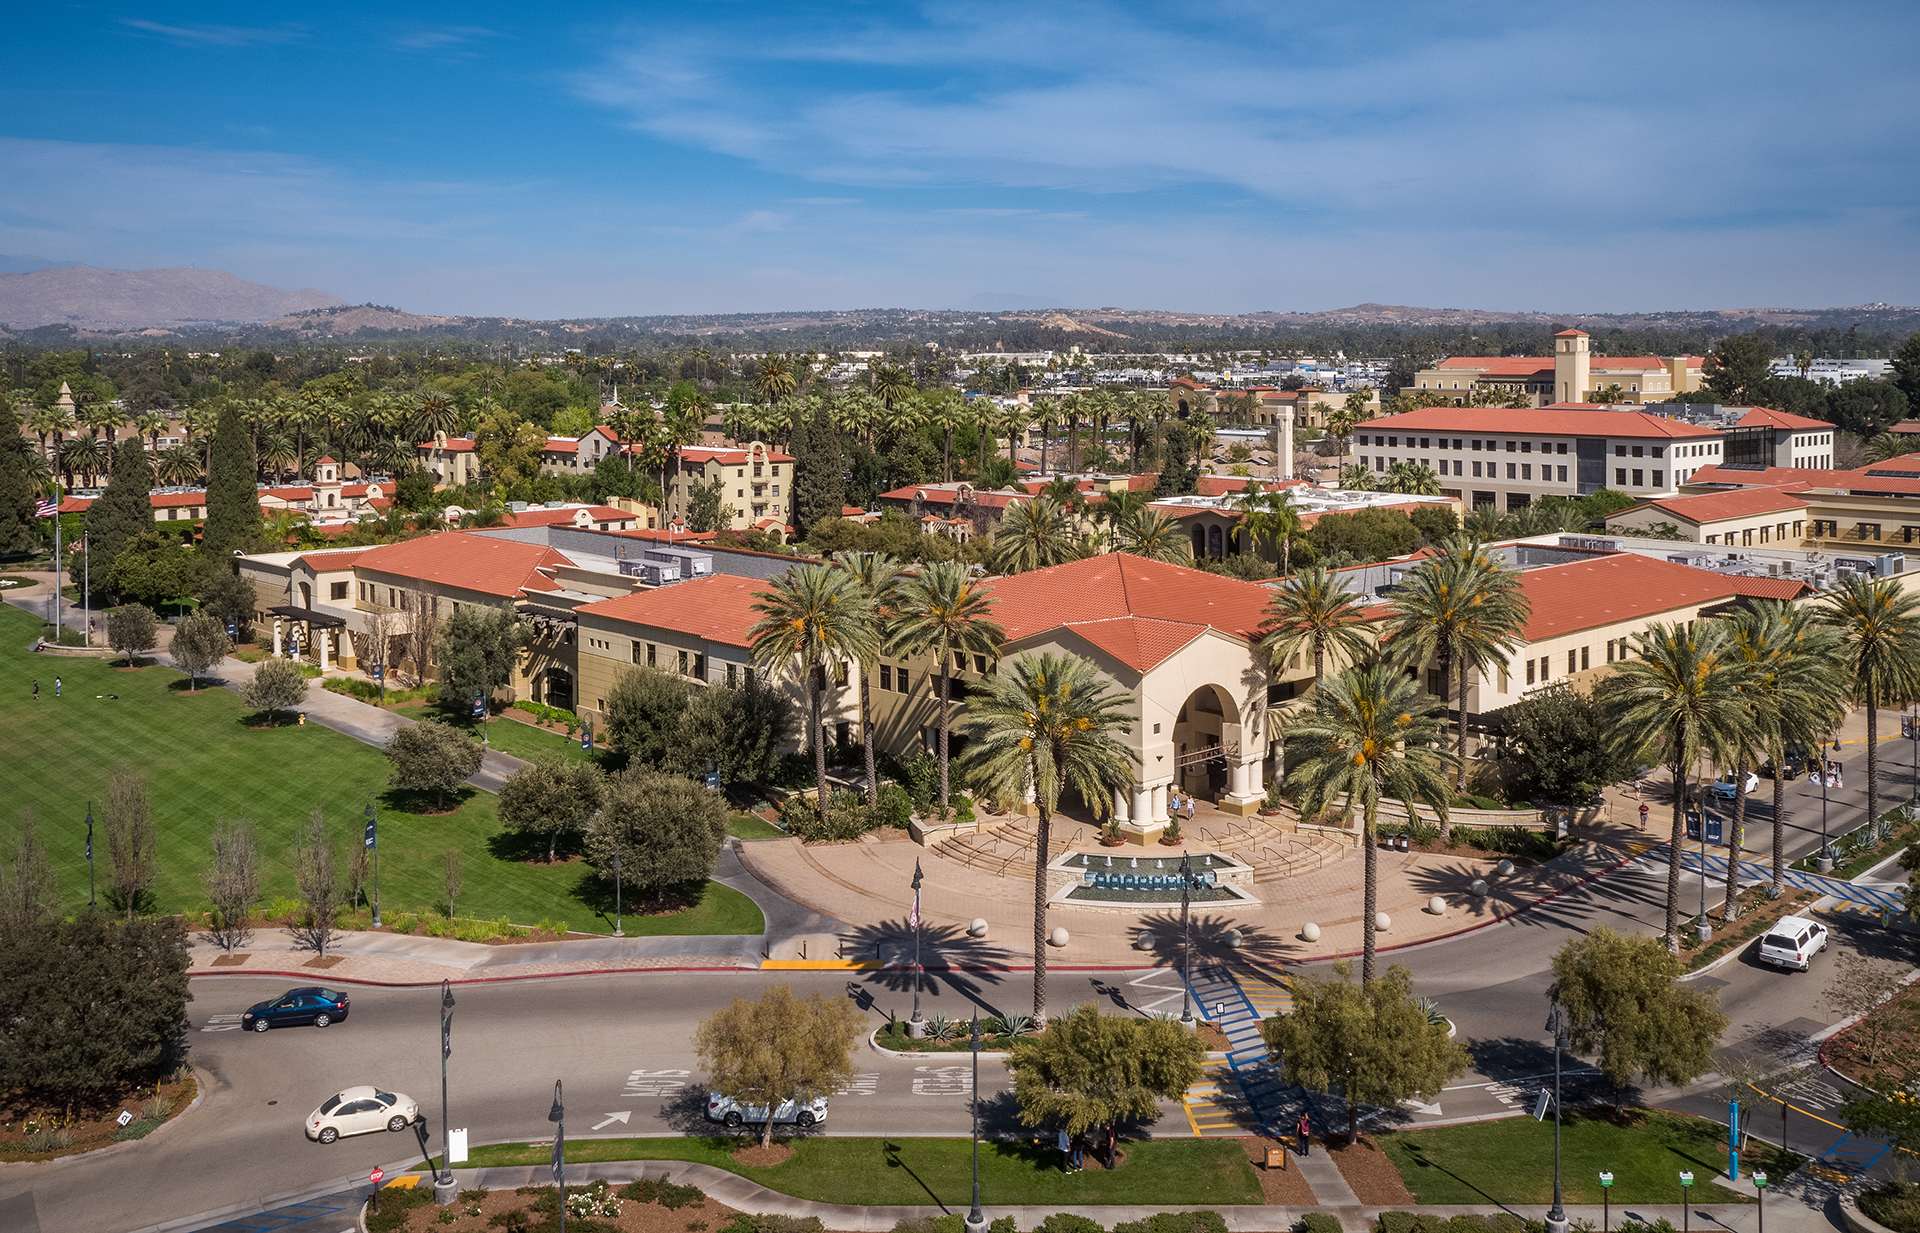 Fall 2018 CBU enrollment tops 10,000 for first time